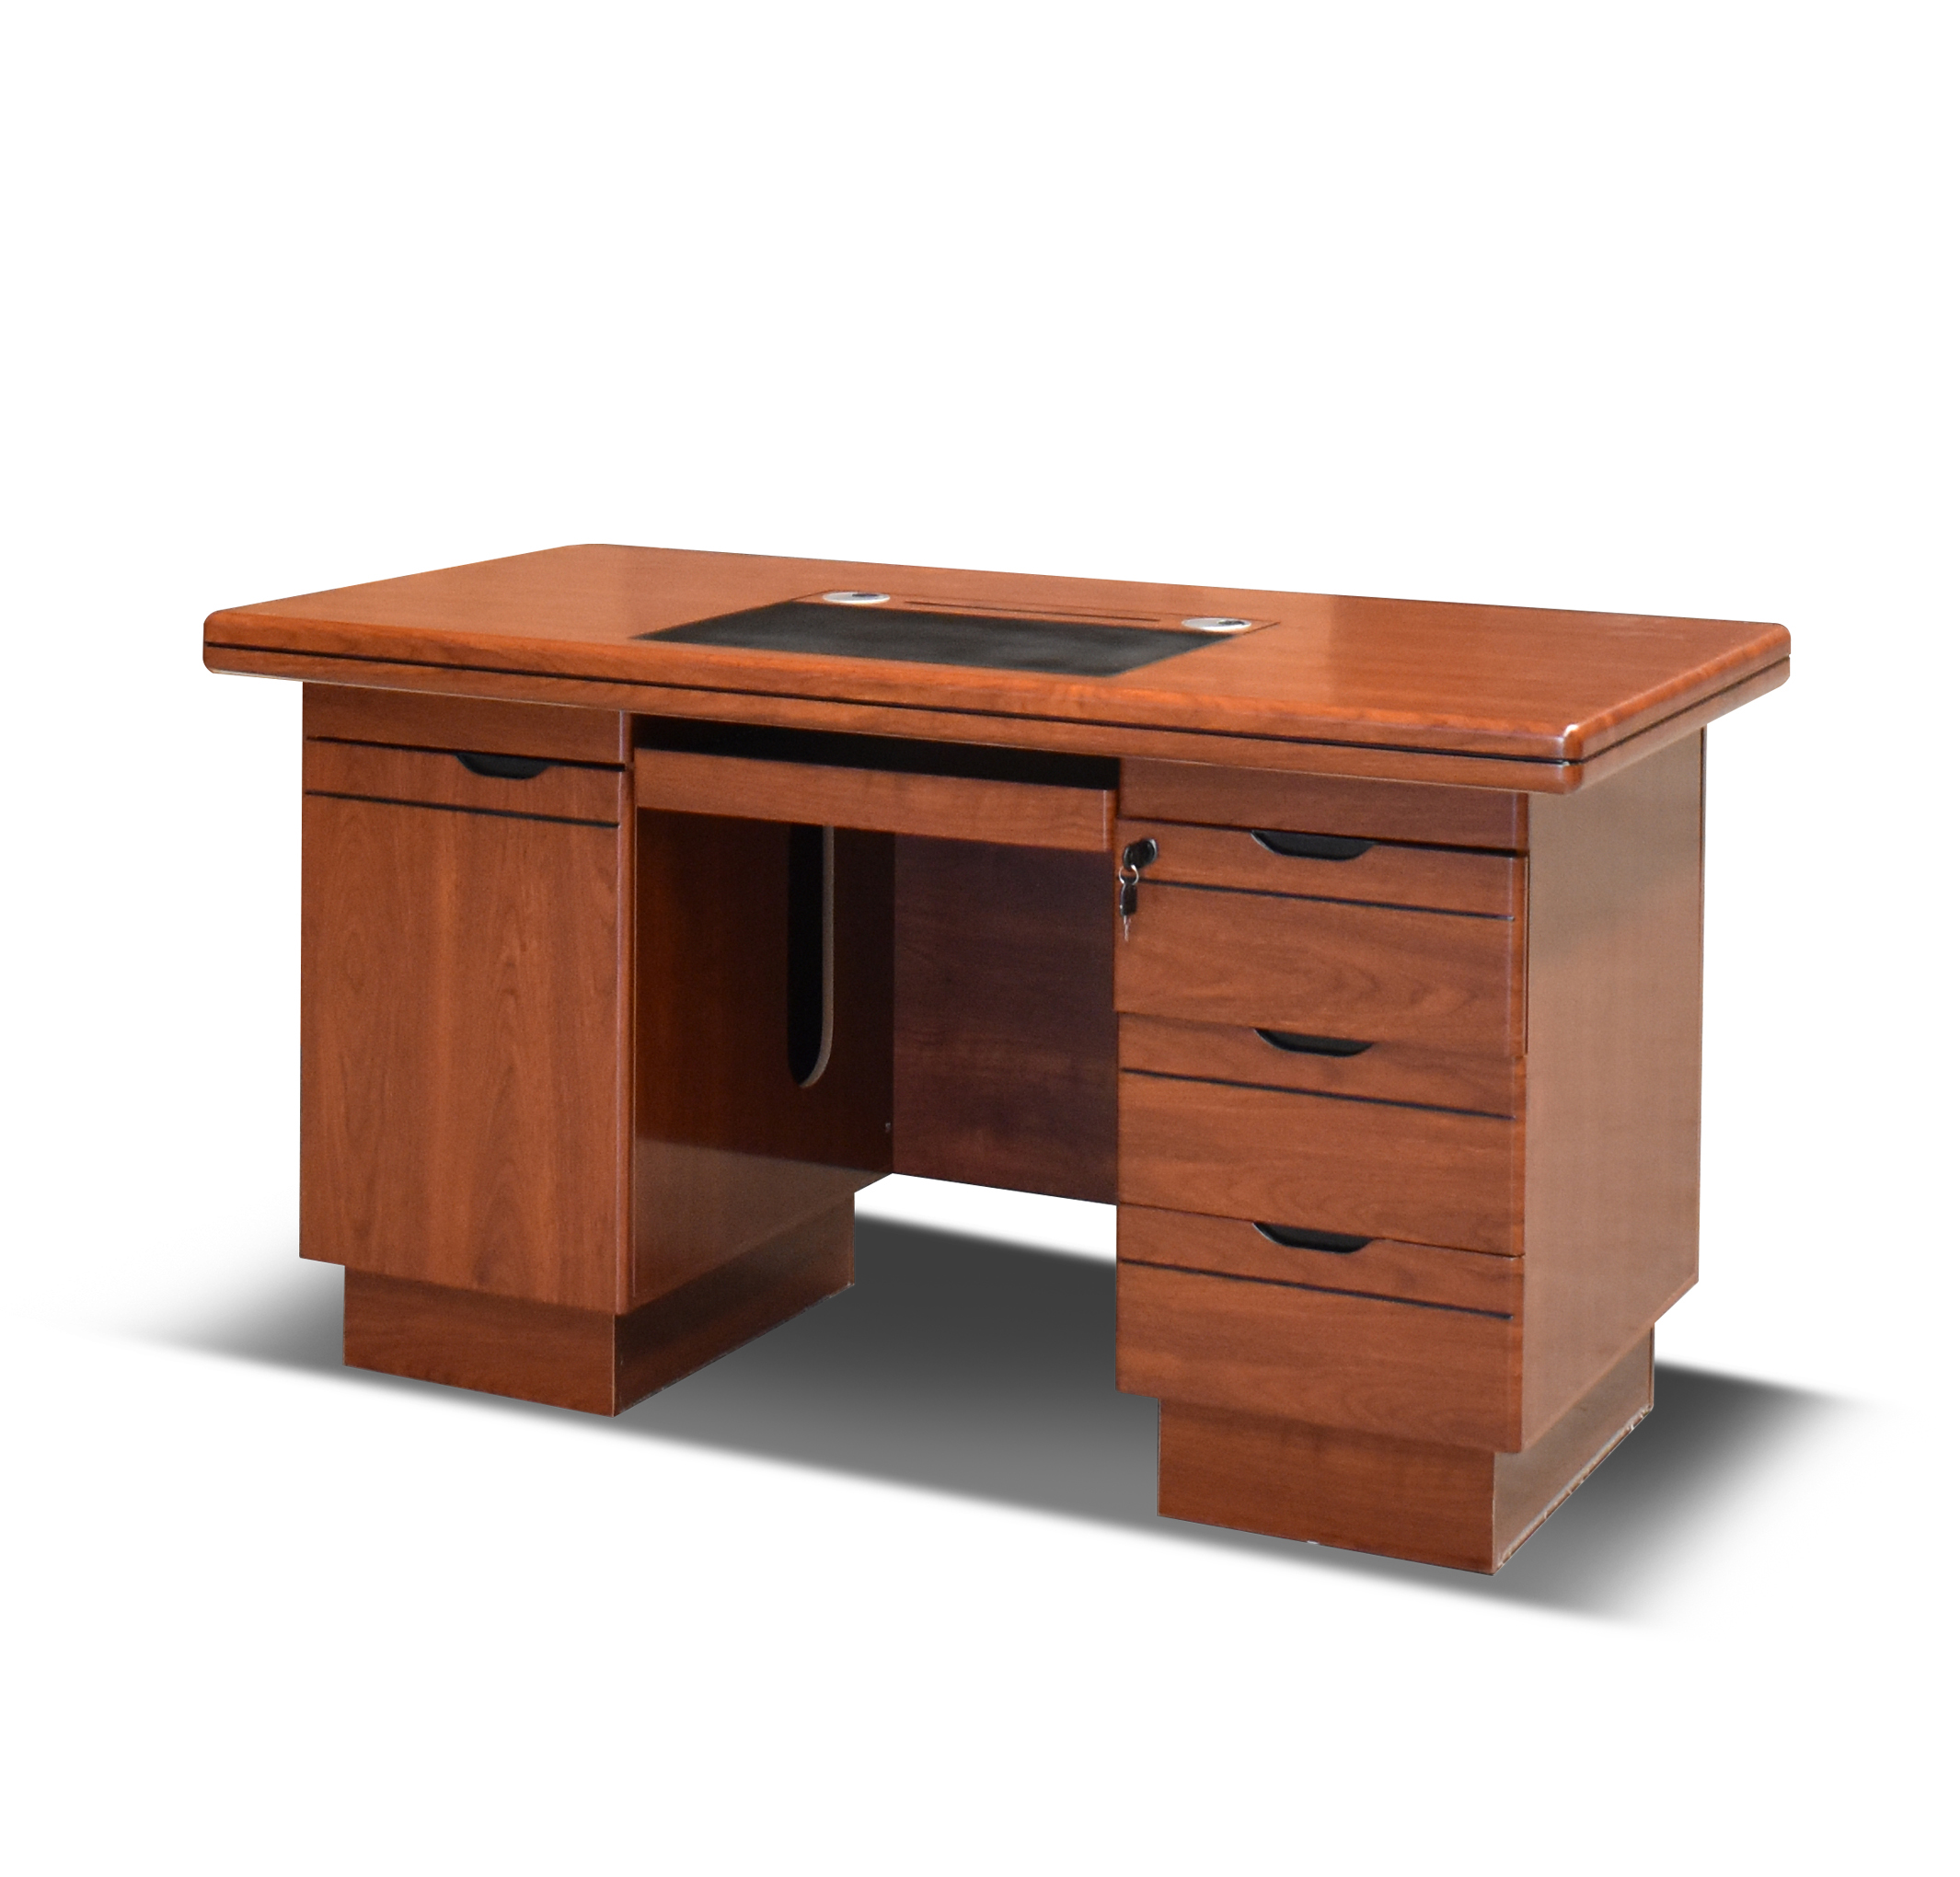 https://www.tadfurniture.com.ph/wp-content/uploads/2022/08/TAD-SANTIAGO-140-OFFICE-TABLE-FRONT.jpg